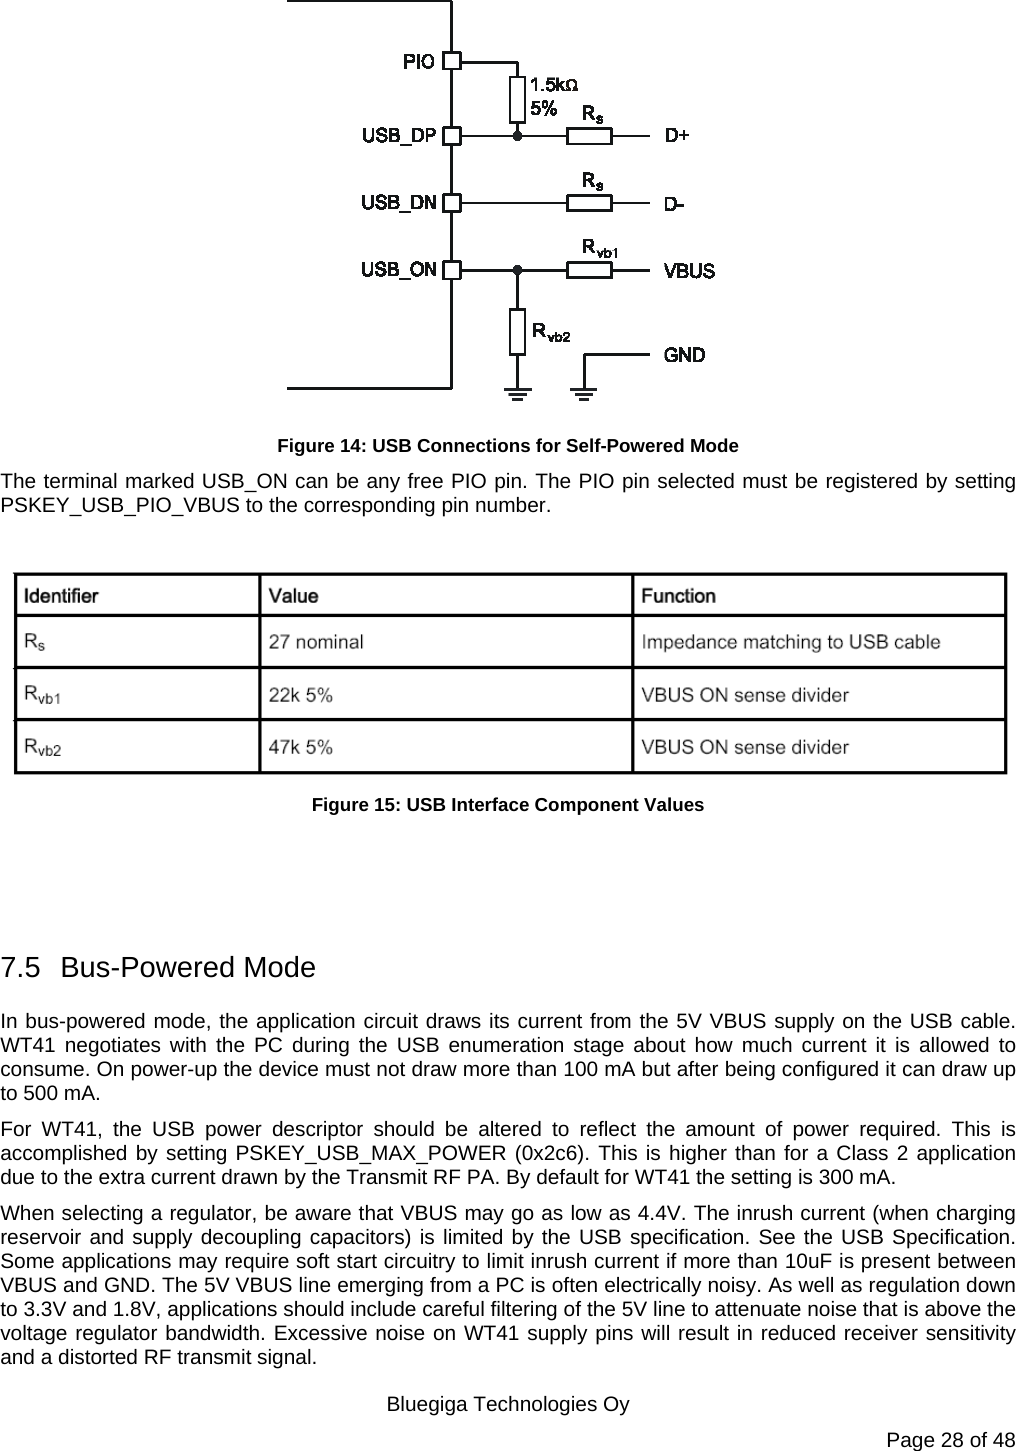   Bluegiga Technologies Oy Page 28 of 48  Figure 14: USB Connections for Self-Powered Mode The terminal marked USB_ON can be any free PIO pin. The PIO pin selected must be registered by setting PSKEY_USB_PIO_VBUS to the corresponding pin number.   Figure 15: USB Interface Component Values    7.5 Bus-Powered Mode In bus-powered mode, the application circuit draws its current from the 5V VBUS supply on the USB cable. WT41 negotiates with the PC during the USB enumeration stage about how much current it is allowed to consume. On power-up the device must not draw more than 100 mA but after being configured it can draw up to 500 mA. For WT41, the USB power descriptor should be altered to reflect the amount of power required. This is accomplished by setting PSKEY_USB_MAX_POWER (0x2c6). This is higher than for a Class 2 application due to the extra current drawn by the Transmit RF PA. By default for WT41 the setting is 300 mA. When selecting a regulator, be aware that VBUS may go as low as 4.4V. The inrush current (when charging reservoir and supply decoupling capacitors) is limited by the USB specification. See the USB Specification. Some applications may require soft start circuitry to limit inrush current if more than 10uF is present between VBUS and GND. The 5V VBUS line emerging from a PC is often electrically noisy. As well as regulation down to 3.3V and 1.8V, applications should include careful filtering of the 5V line to attenuate noise that is above the voltage regulator bandwidth. Excessive noise on WT41 supply pins will result in reduced receiver sensitivity and a distorted RF transmit signal. 